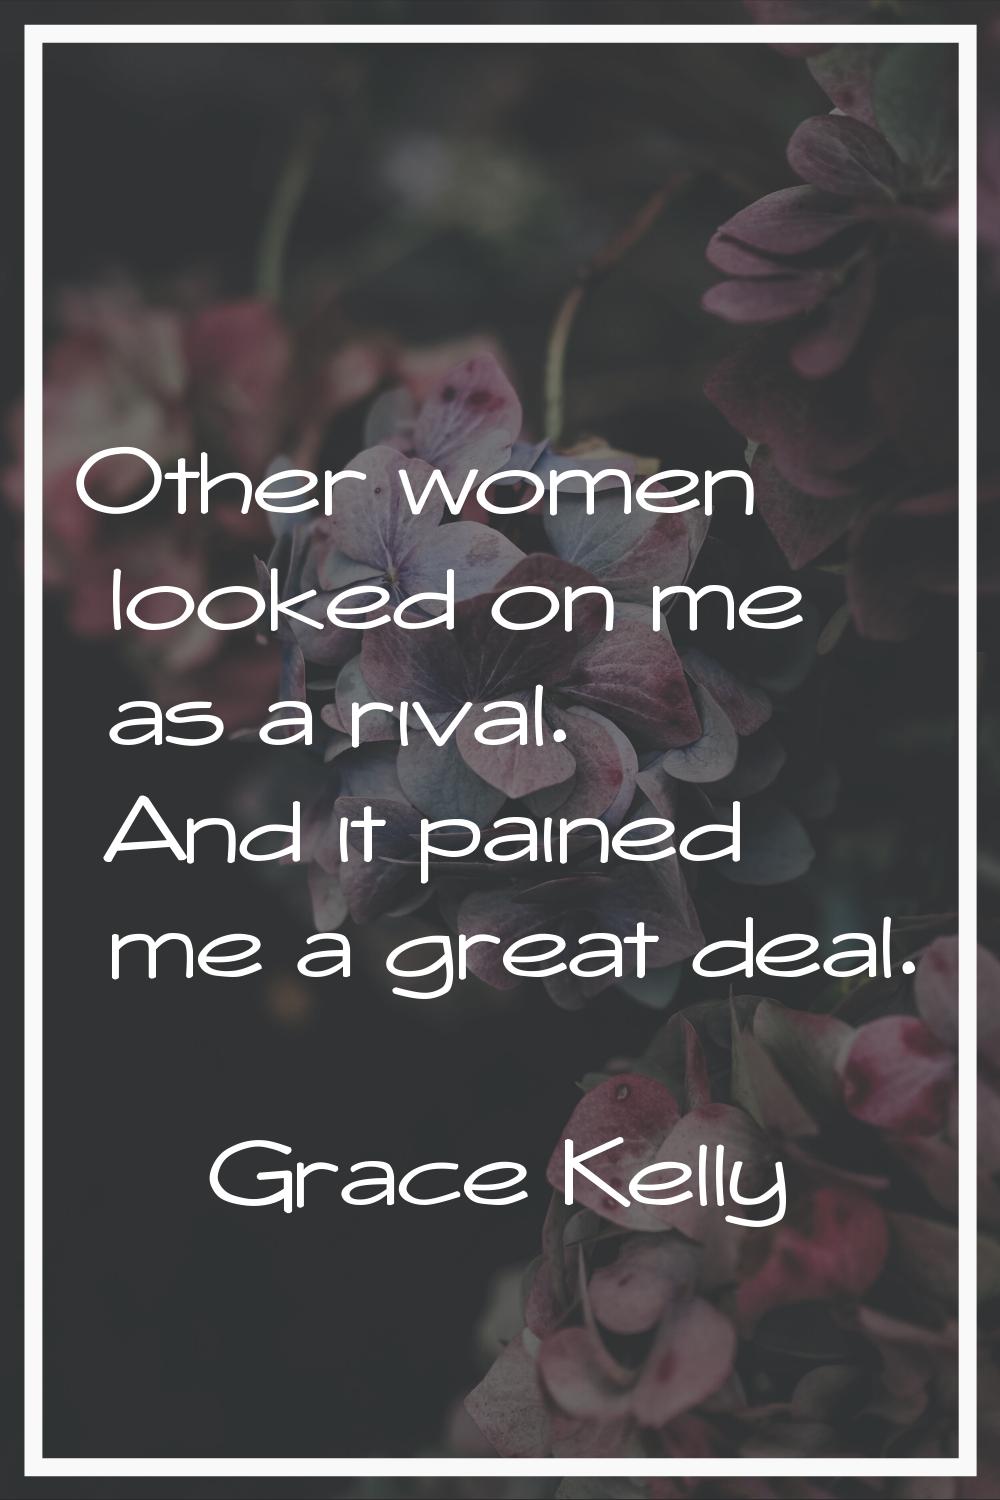 Other women looked on me as a rival. And it pained me a great deal.